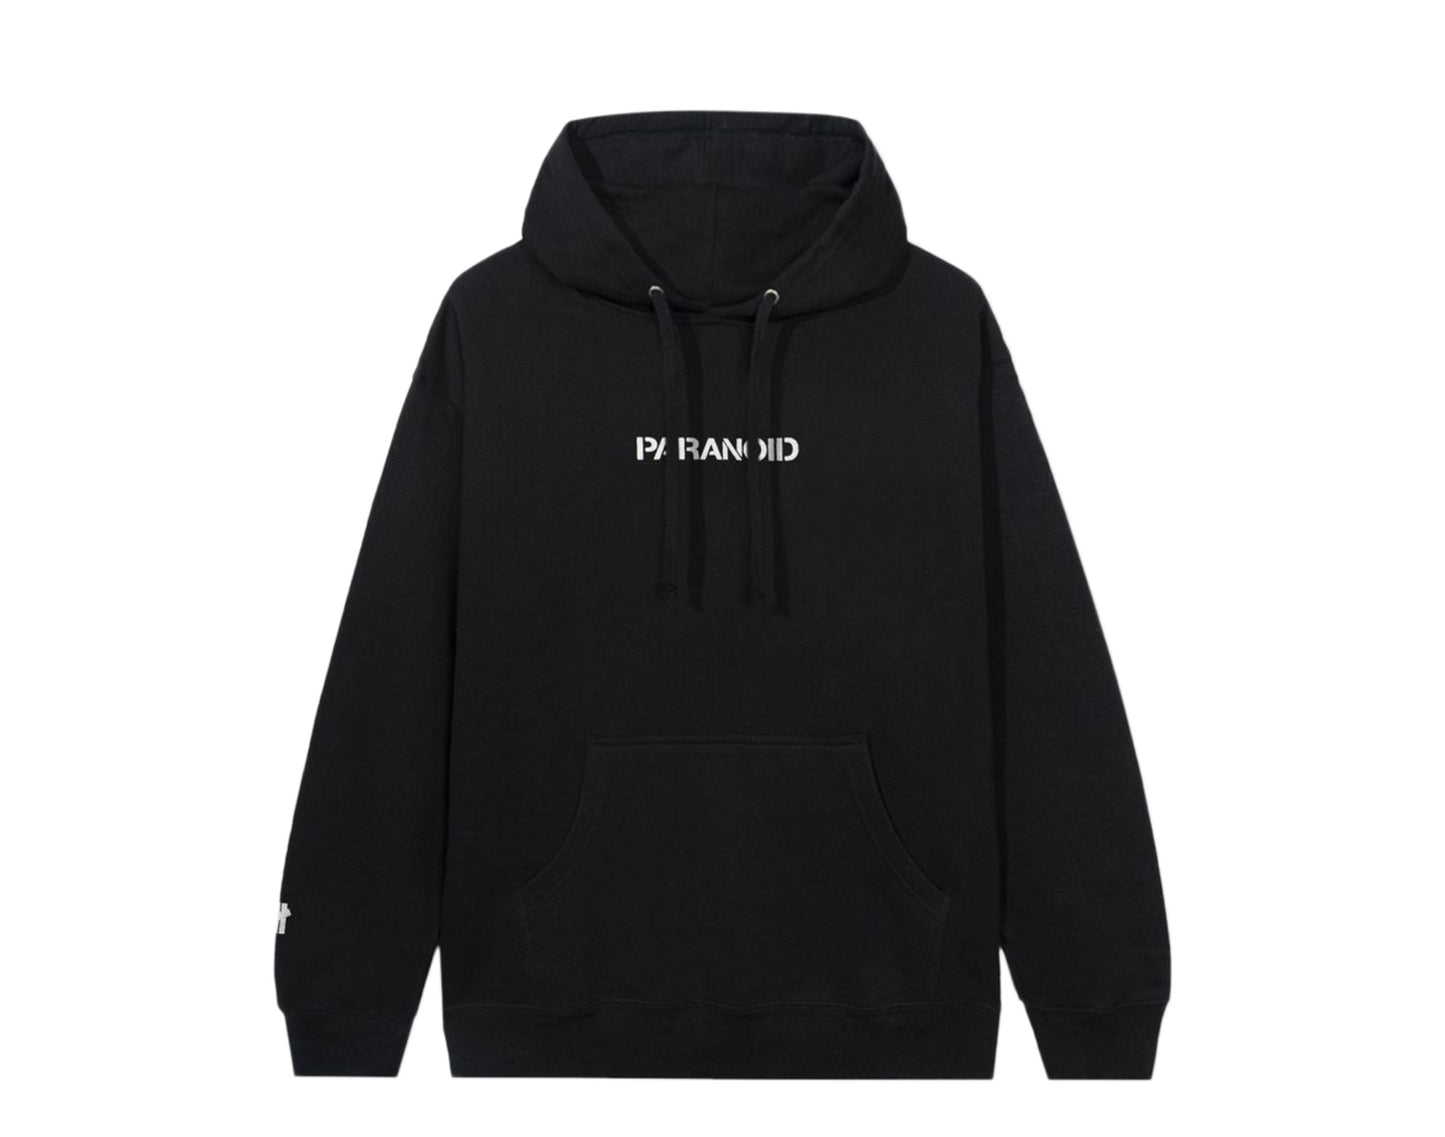 Anti Social Social Club X Undefeated Paranoid Black Hoodie (3M Reflective)